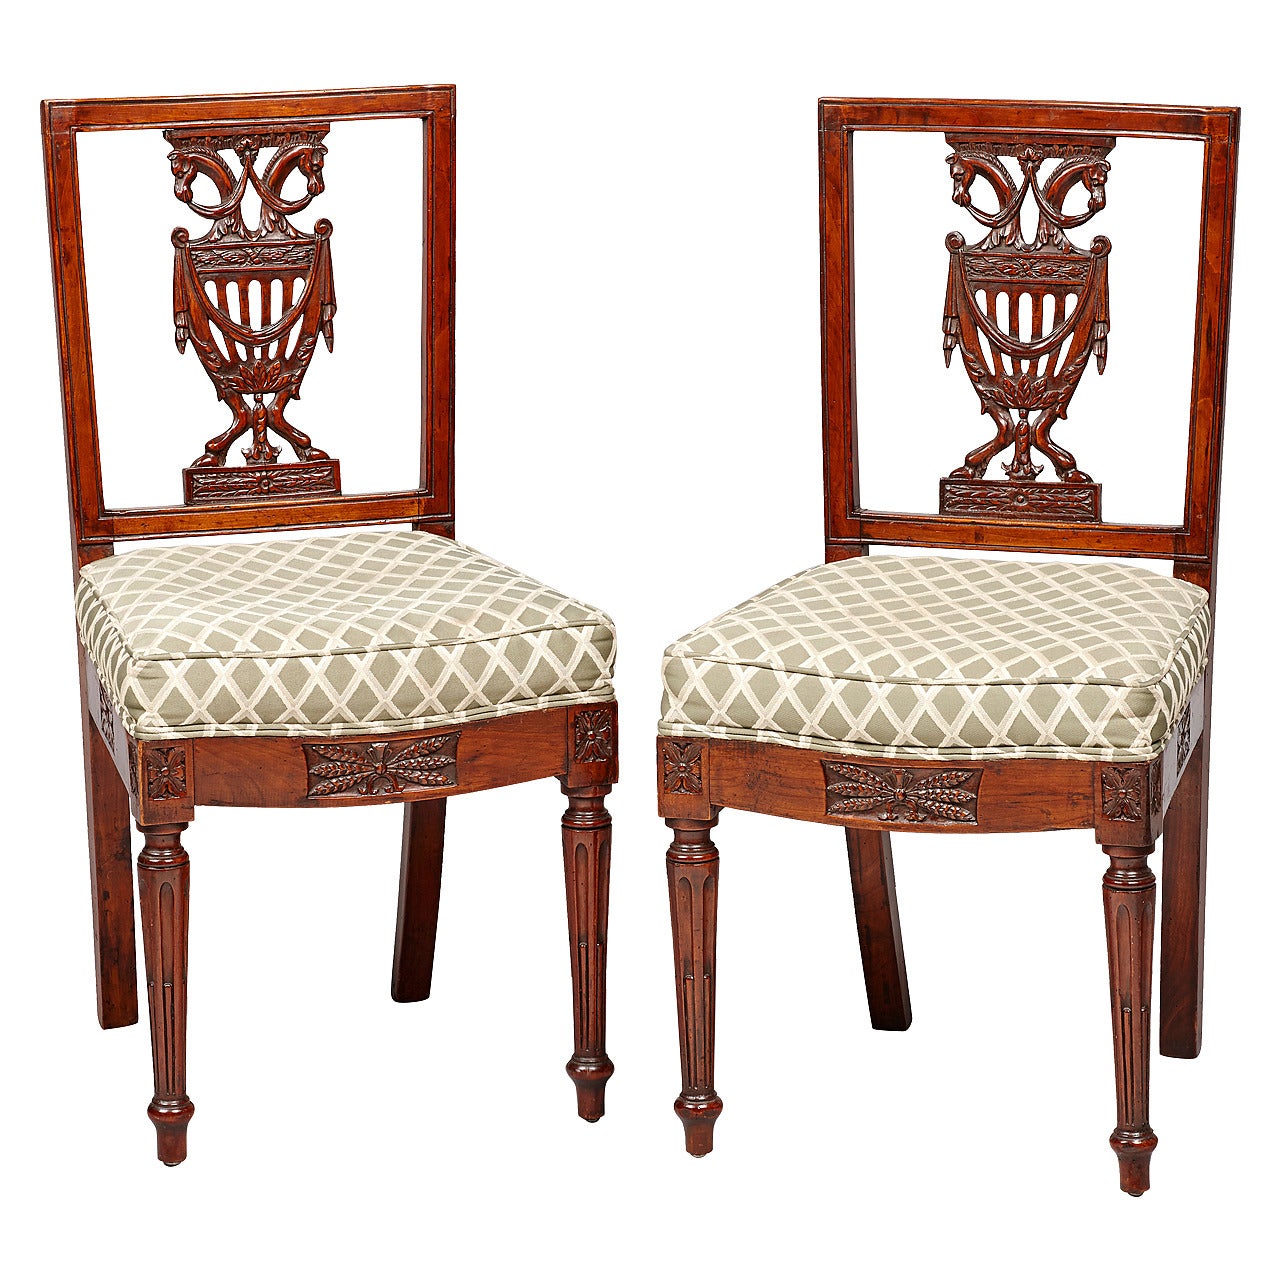 Pair of Royal Late 18th Century Neoclassical Berlin Side Chairs